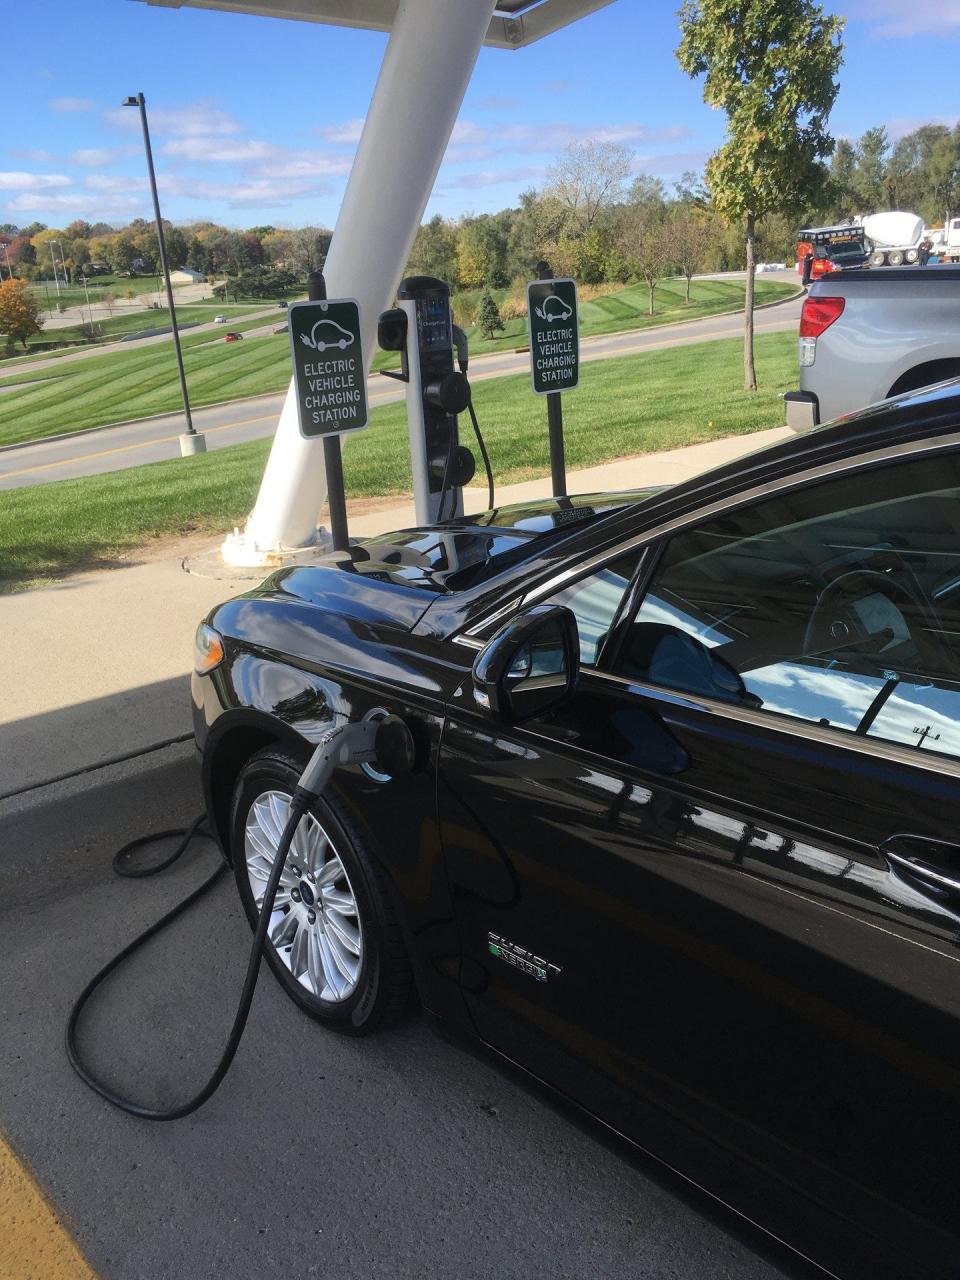 Iowa is seeking to increase availability of charging stations for electric cars along its interstate highways.